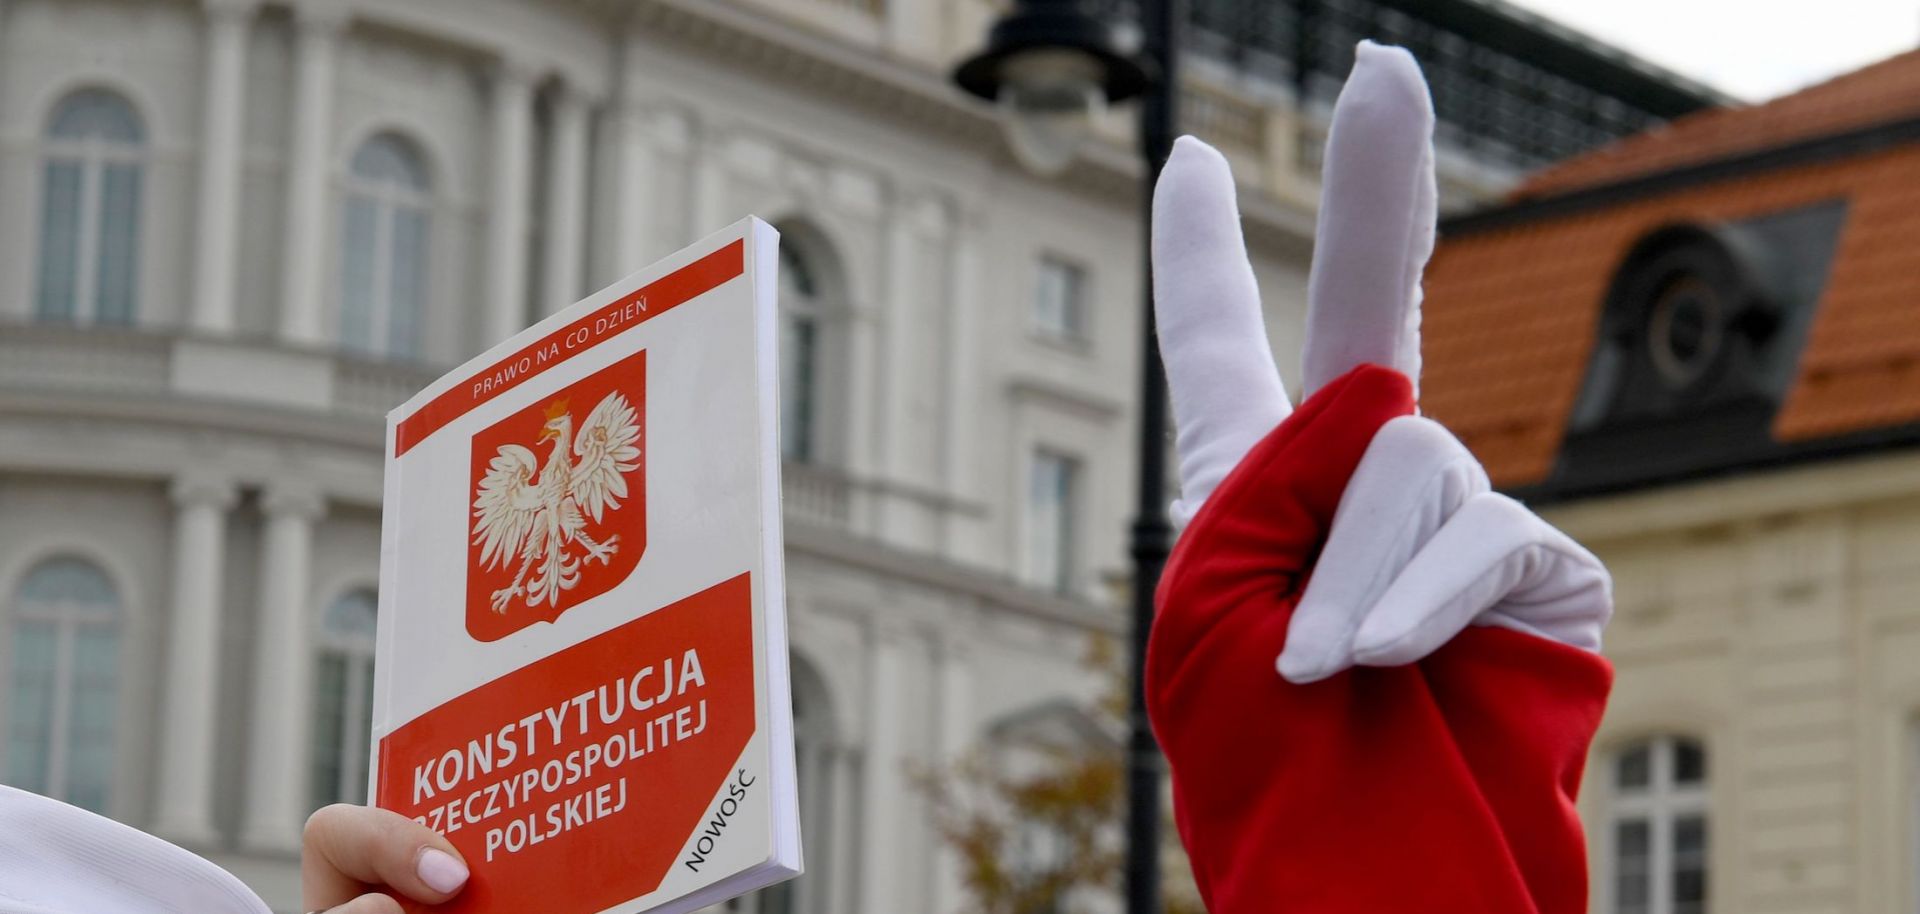 A demonstration in support of Polish Supreme Court judges.